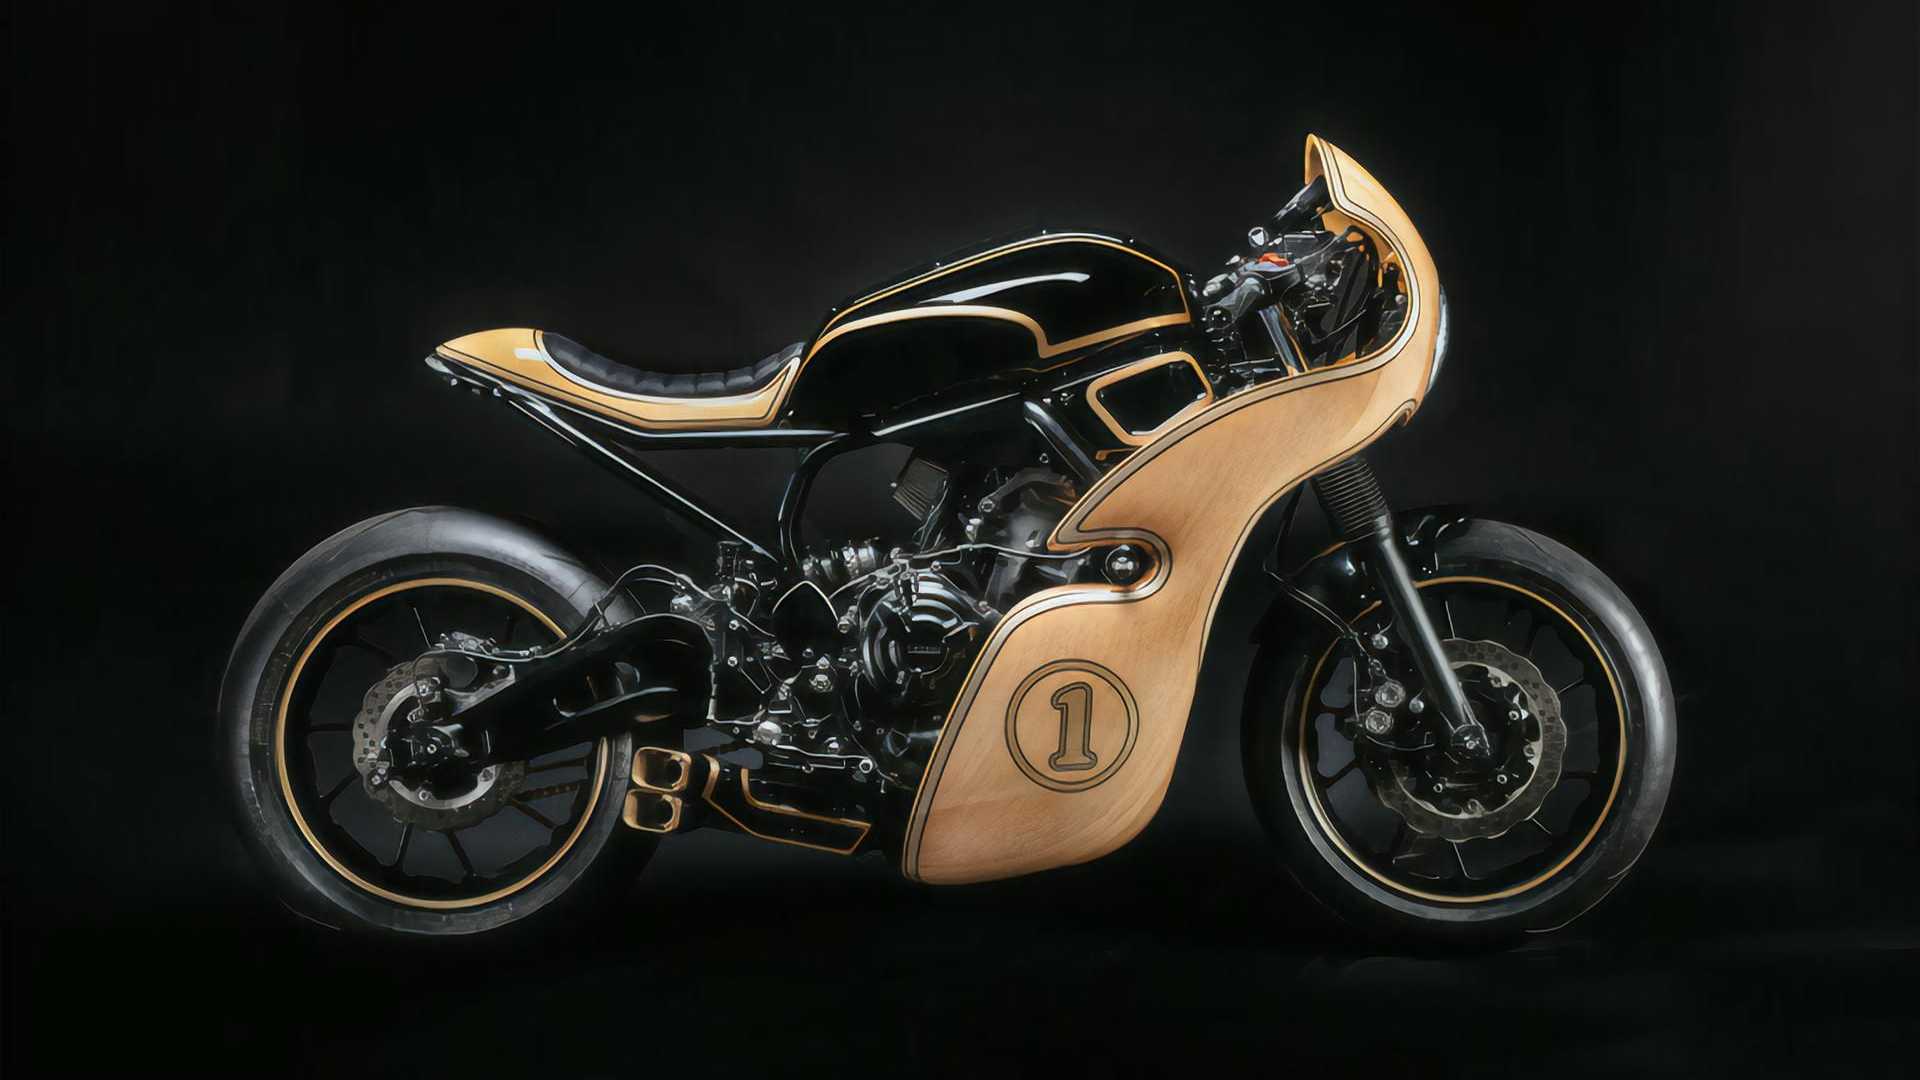 yamaha xsr700 Hommage wooden faring motorcycle